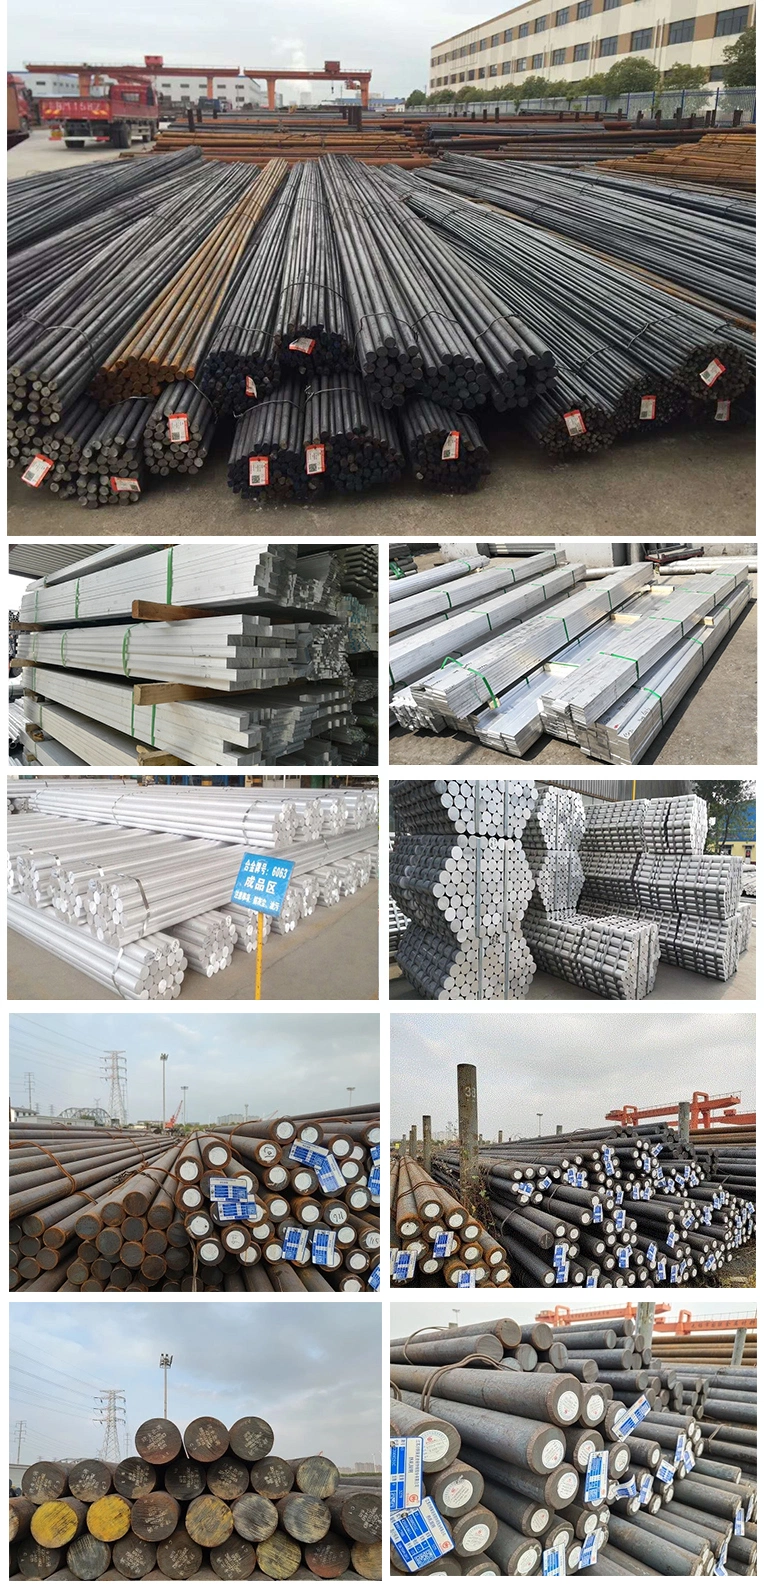 Hot Rolled Carbon Steel Bar AISI Type 1018 1010 16crmn5 Alloy Steel Round Bar Stock